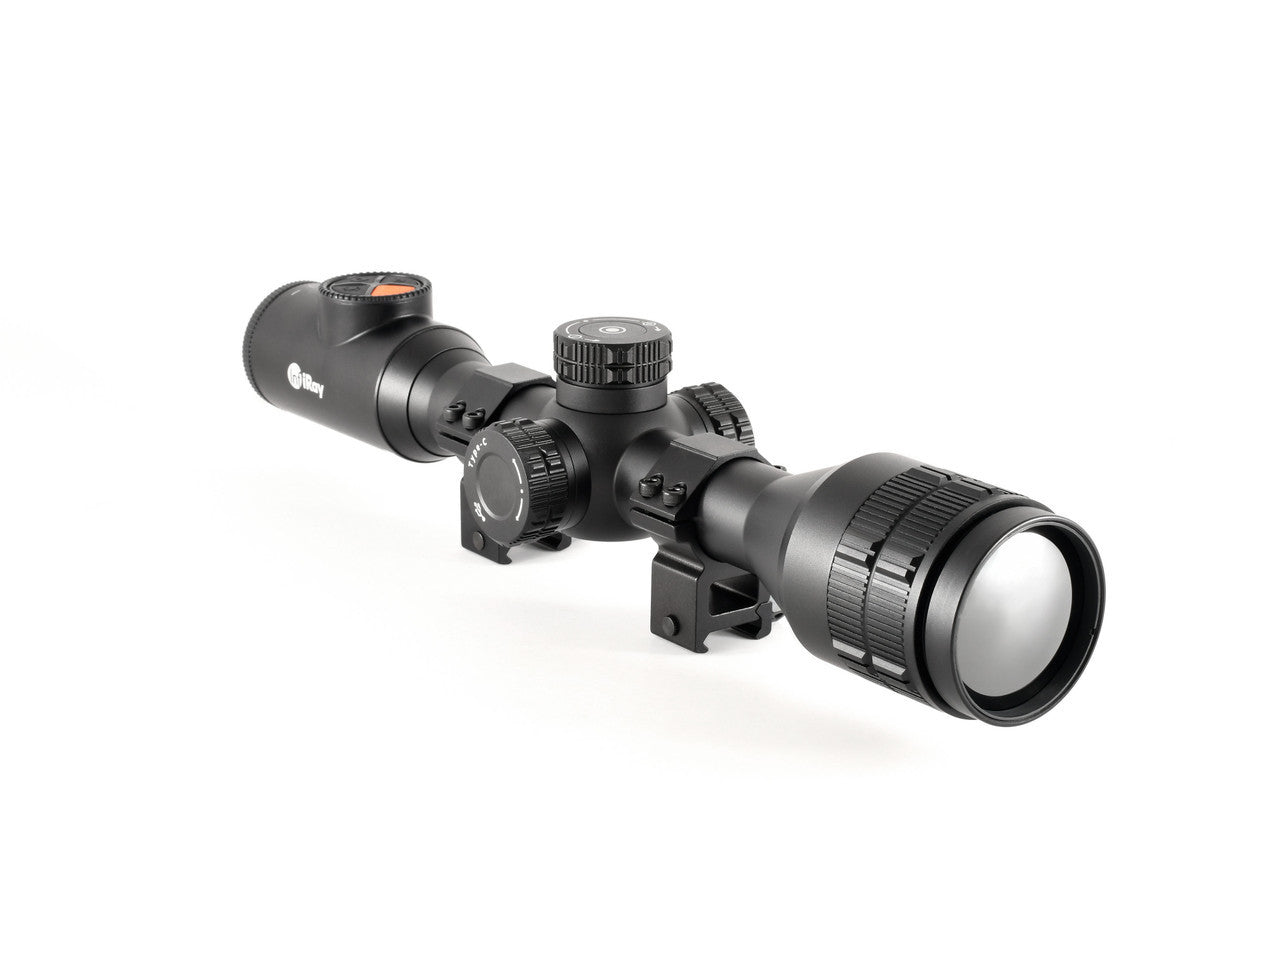 InfiRay Outdoor Bolt TH50-C V2 640 3.5x-14x 50mm Thermal Rifle Scope